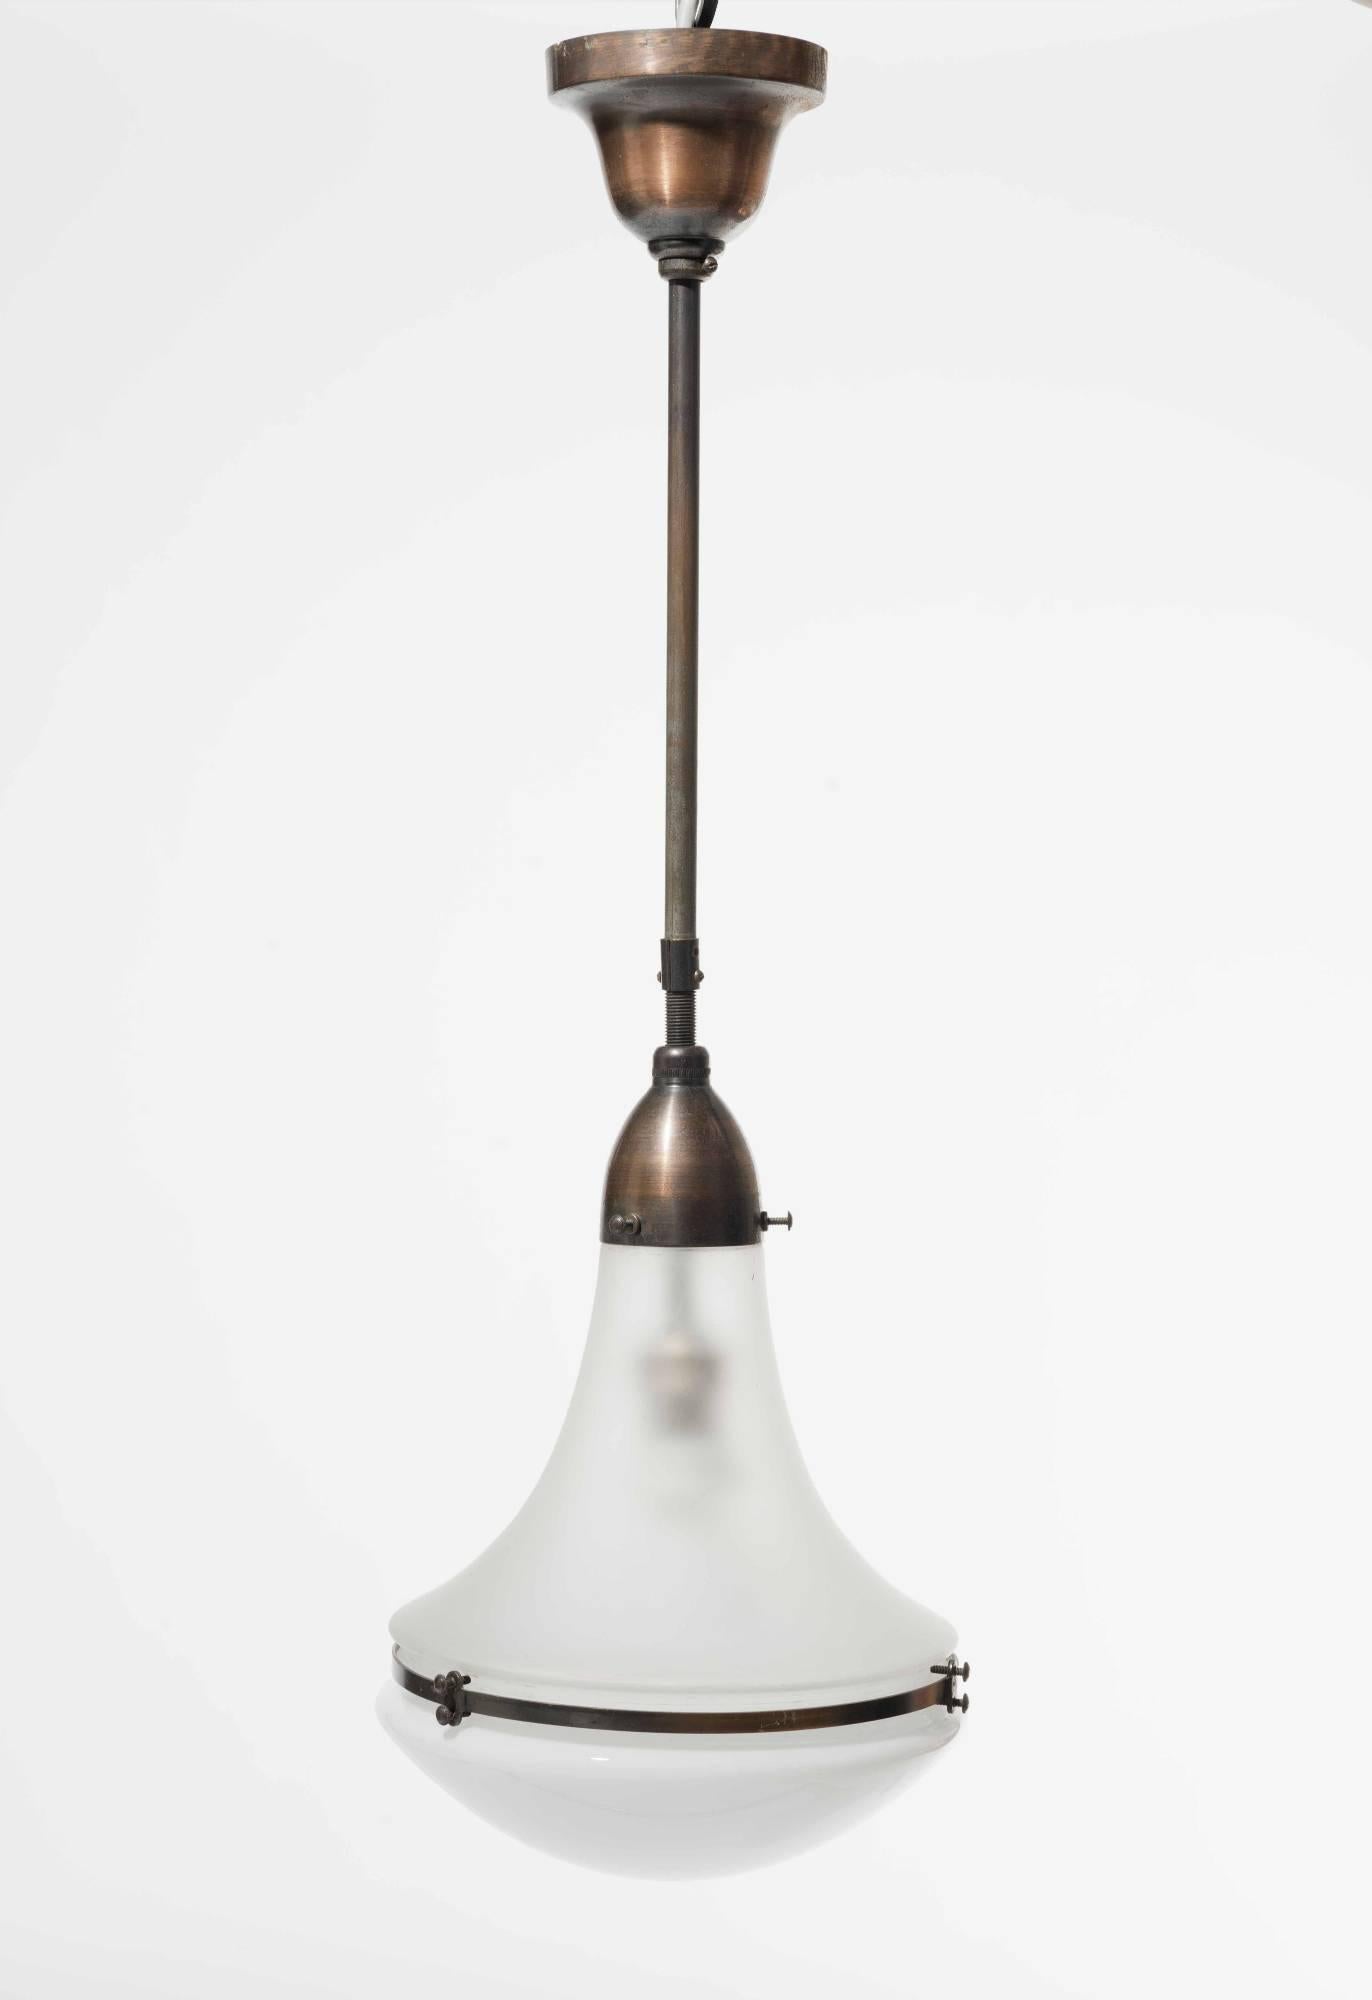 This classic Peter Behrens design piece from circa 1910 was manufactured in Germany by SSW (Siemens-Schuckert-Werke GmbH). A frosted white glass shade is held in place by a bell-shaped metallic attachment and stem, encasing the bulb for the